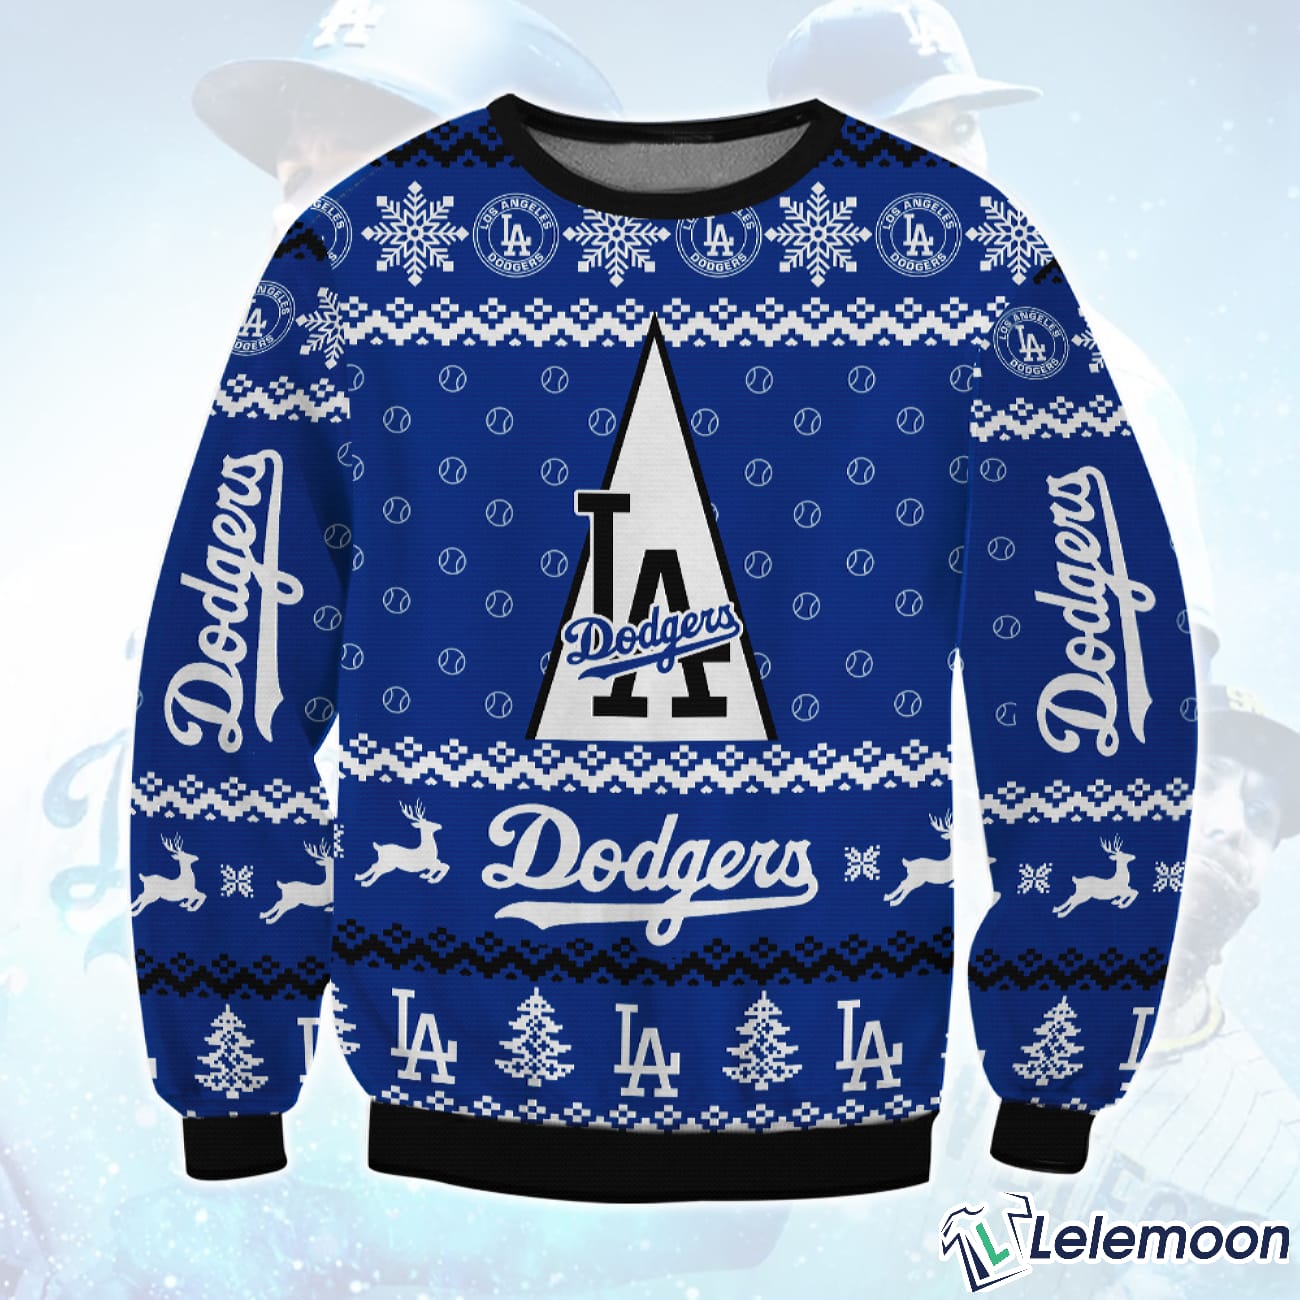 L.A. Dodgers Shirts, Sweaters, Dodgers Ugly Sweaters, Dress Shirts